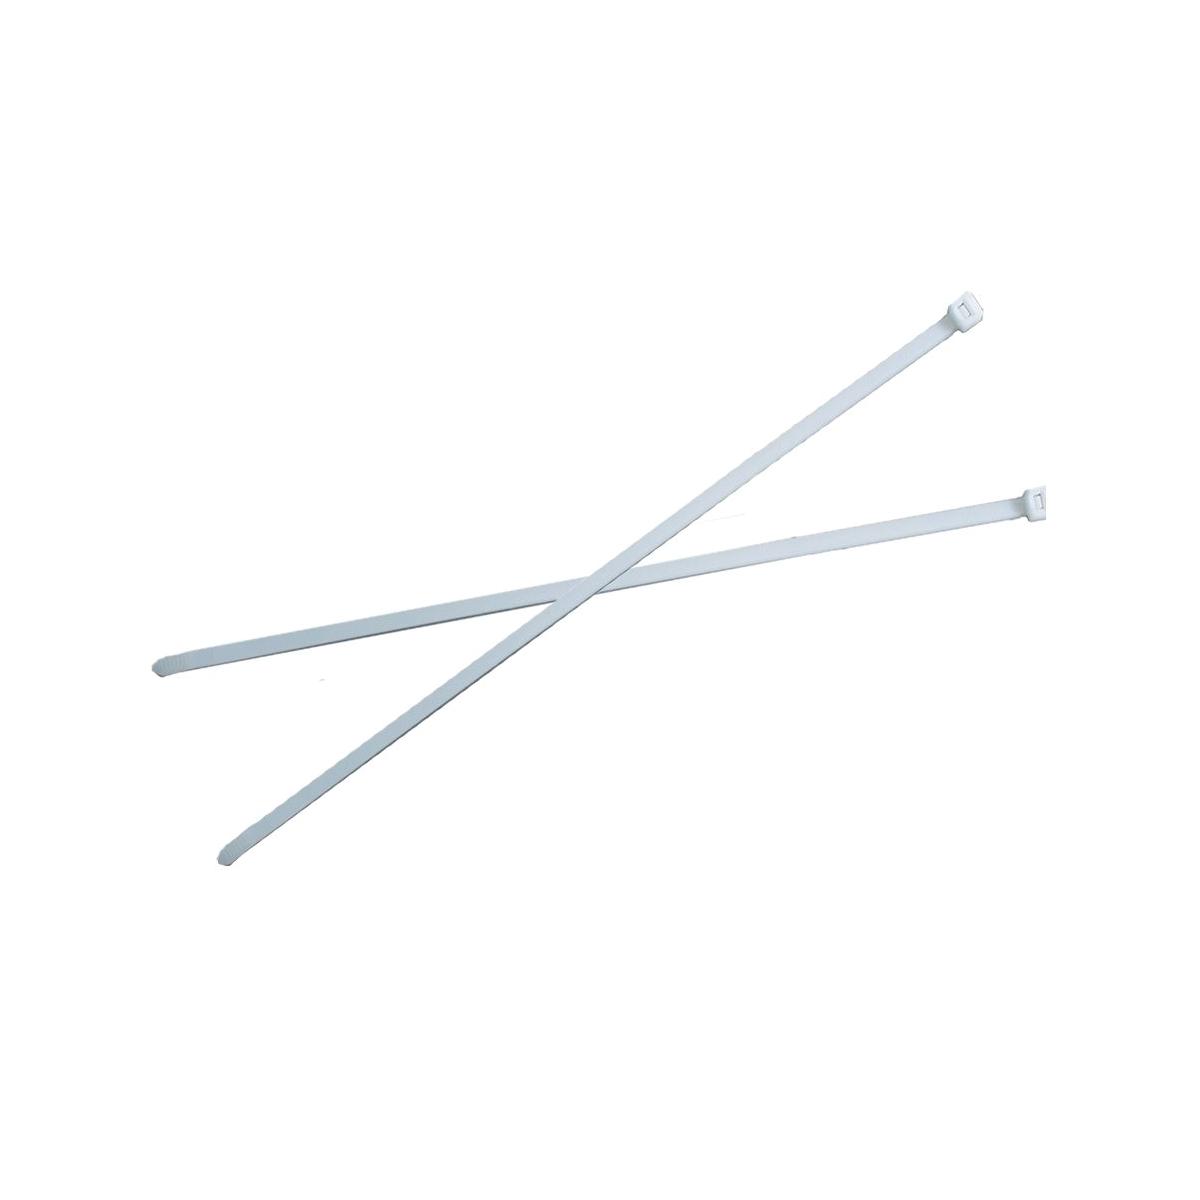 Hubbell CT50175C Natural Nylon 6/6 Cable Tie, 1.75" Max. Bundle Dia, 50 Lbs, 8" Long.  ; Standard Cable Tie ; Features: Cable Ties for General Use Available in Black or Natural, One piece injection molded, Installation Tool: TWT1, MK7 Tool